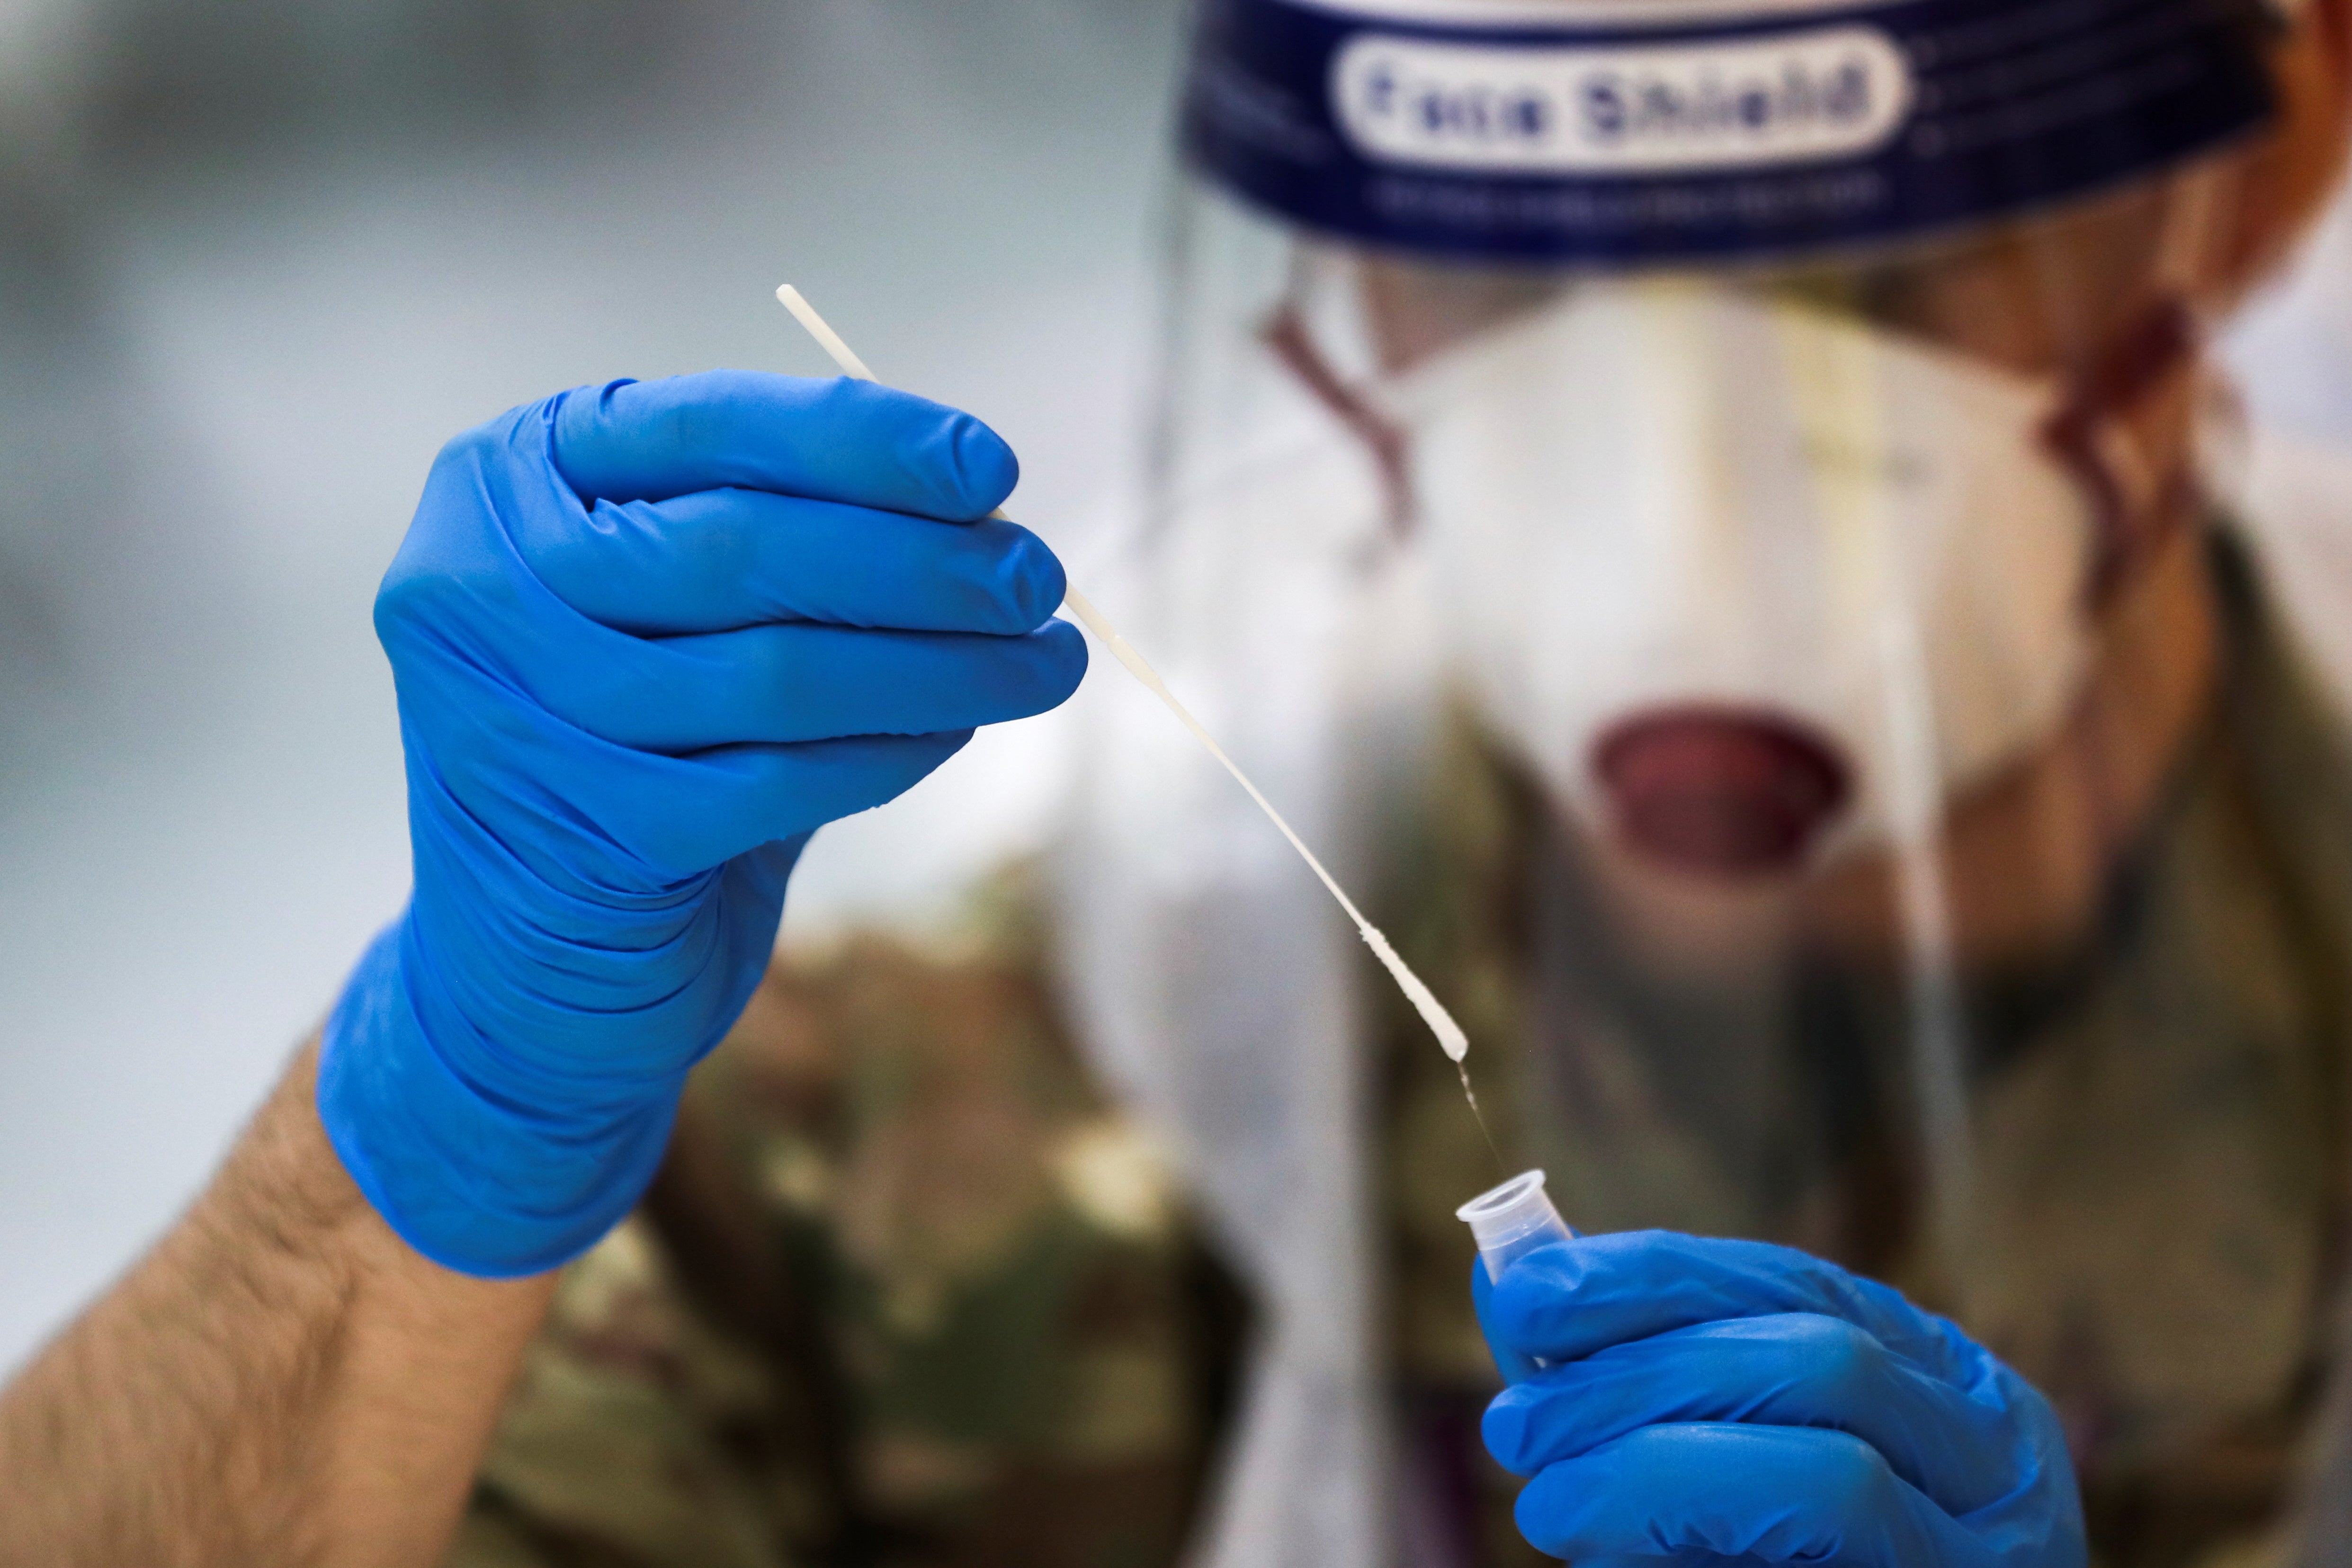 A soldier administers a lateral flow coronavirus test